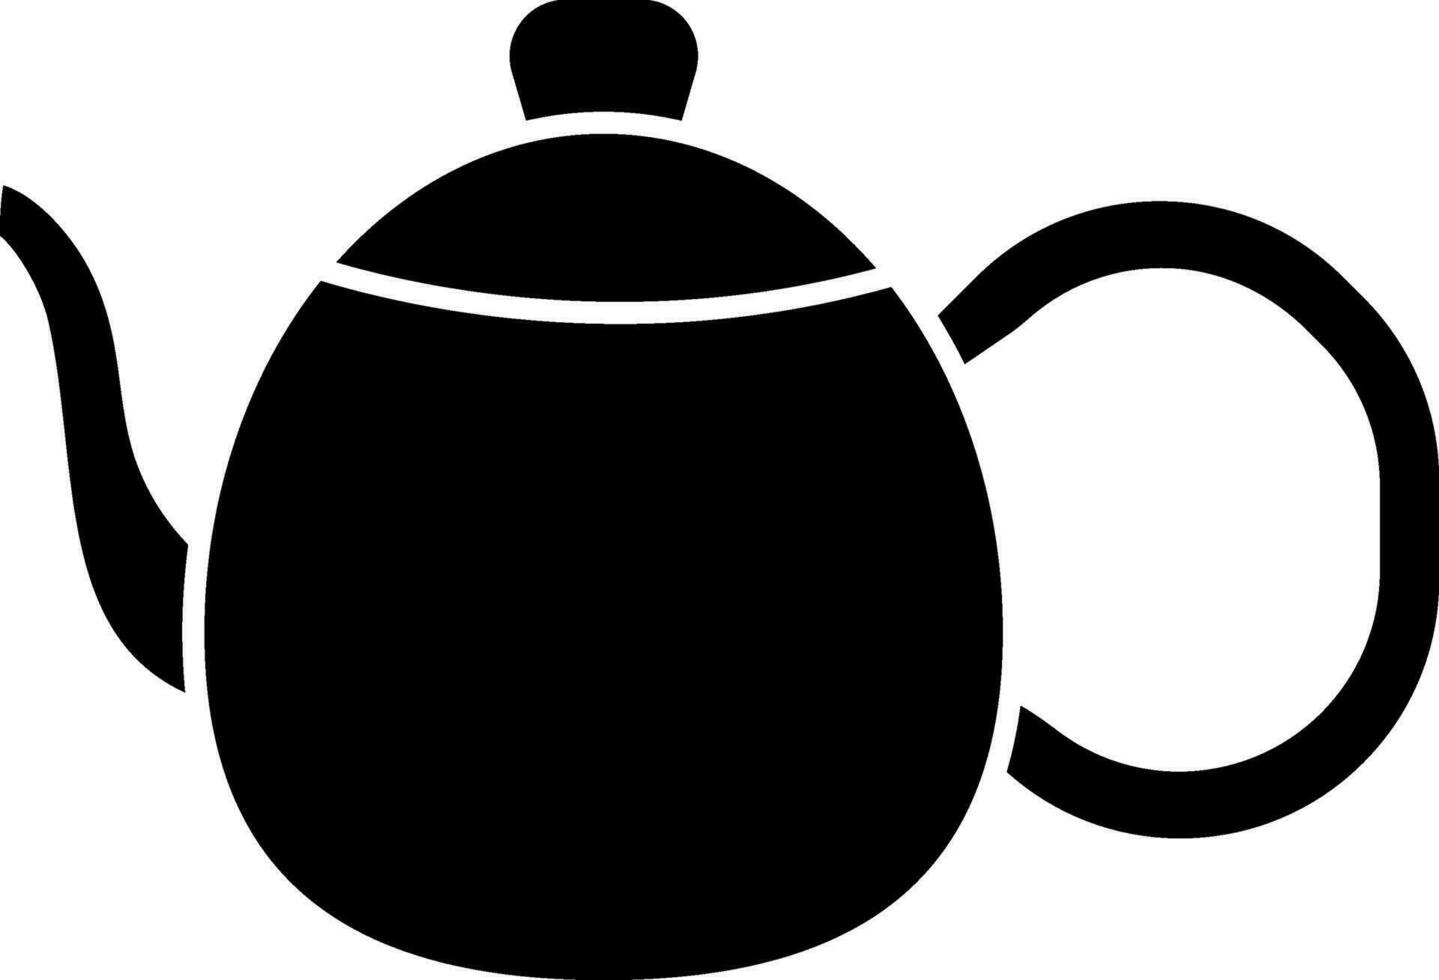 Flat Style kettle Icon In Thin Line Art. vector